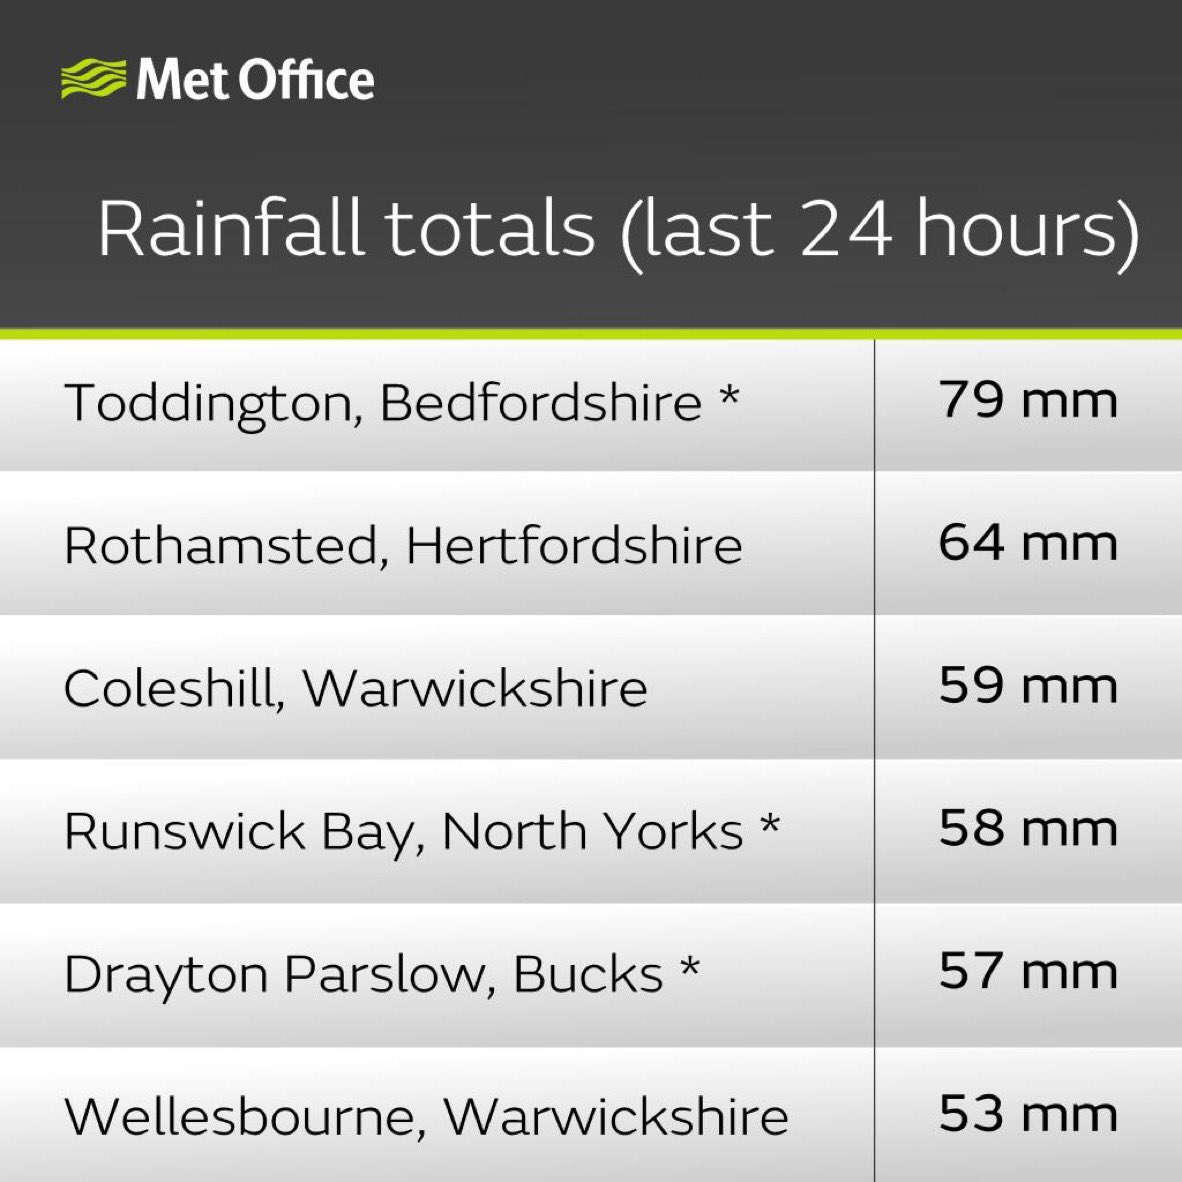 A month’s worth of rain in the last 24 hours for a number of locations. Expect more places to be added as the heavy rain moves slowly north.